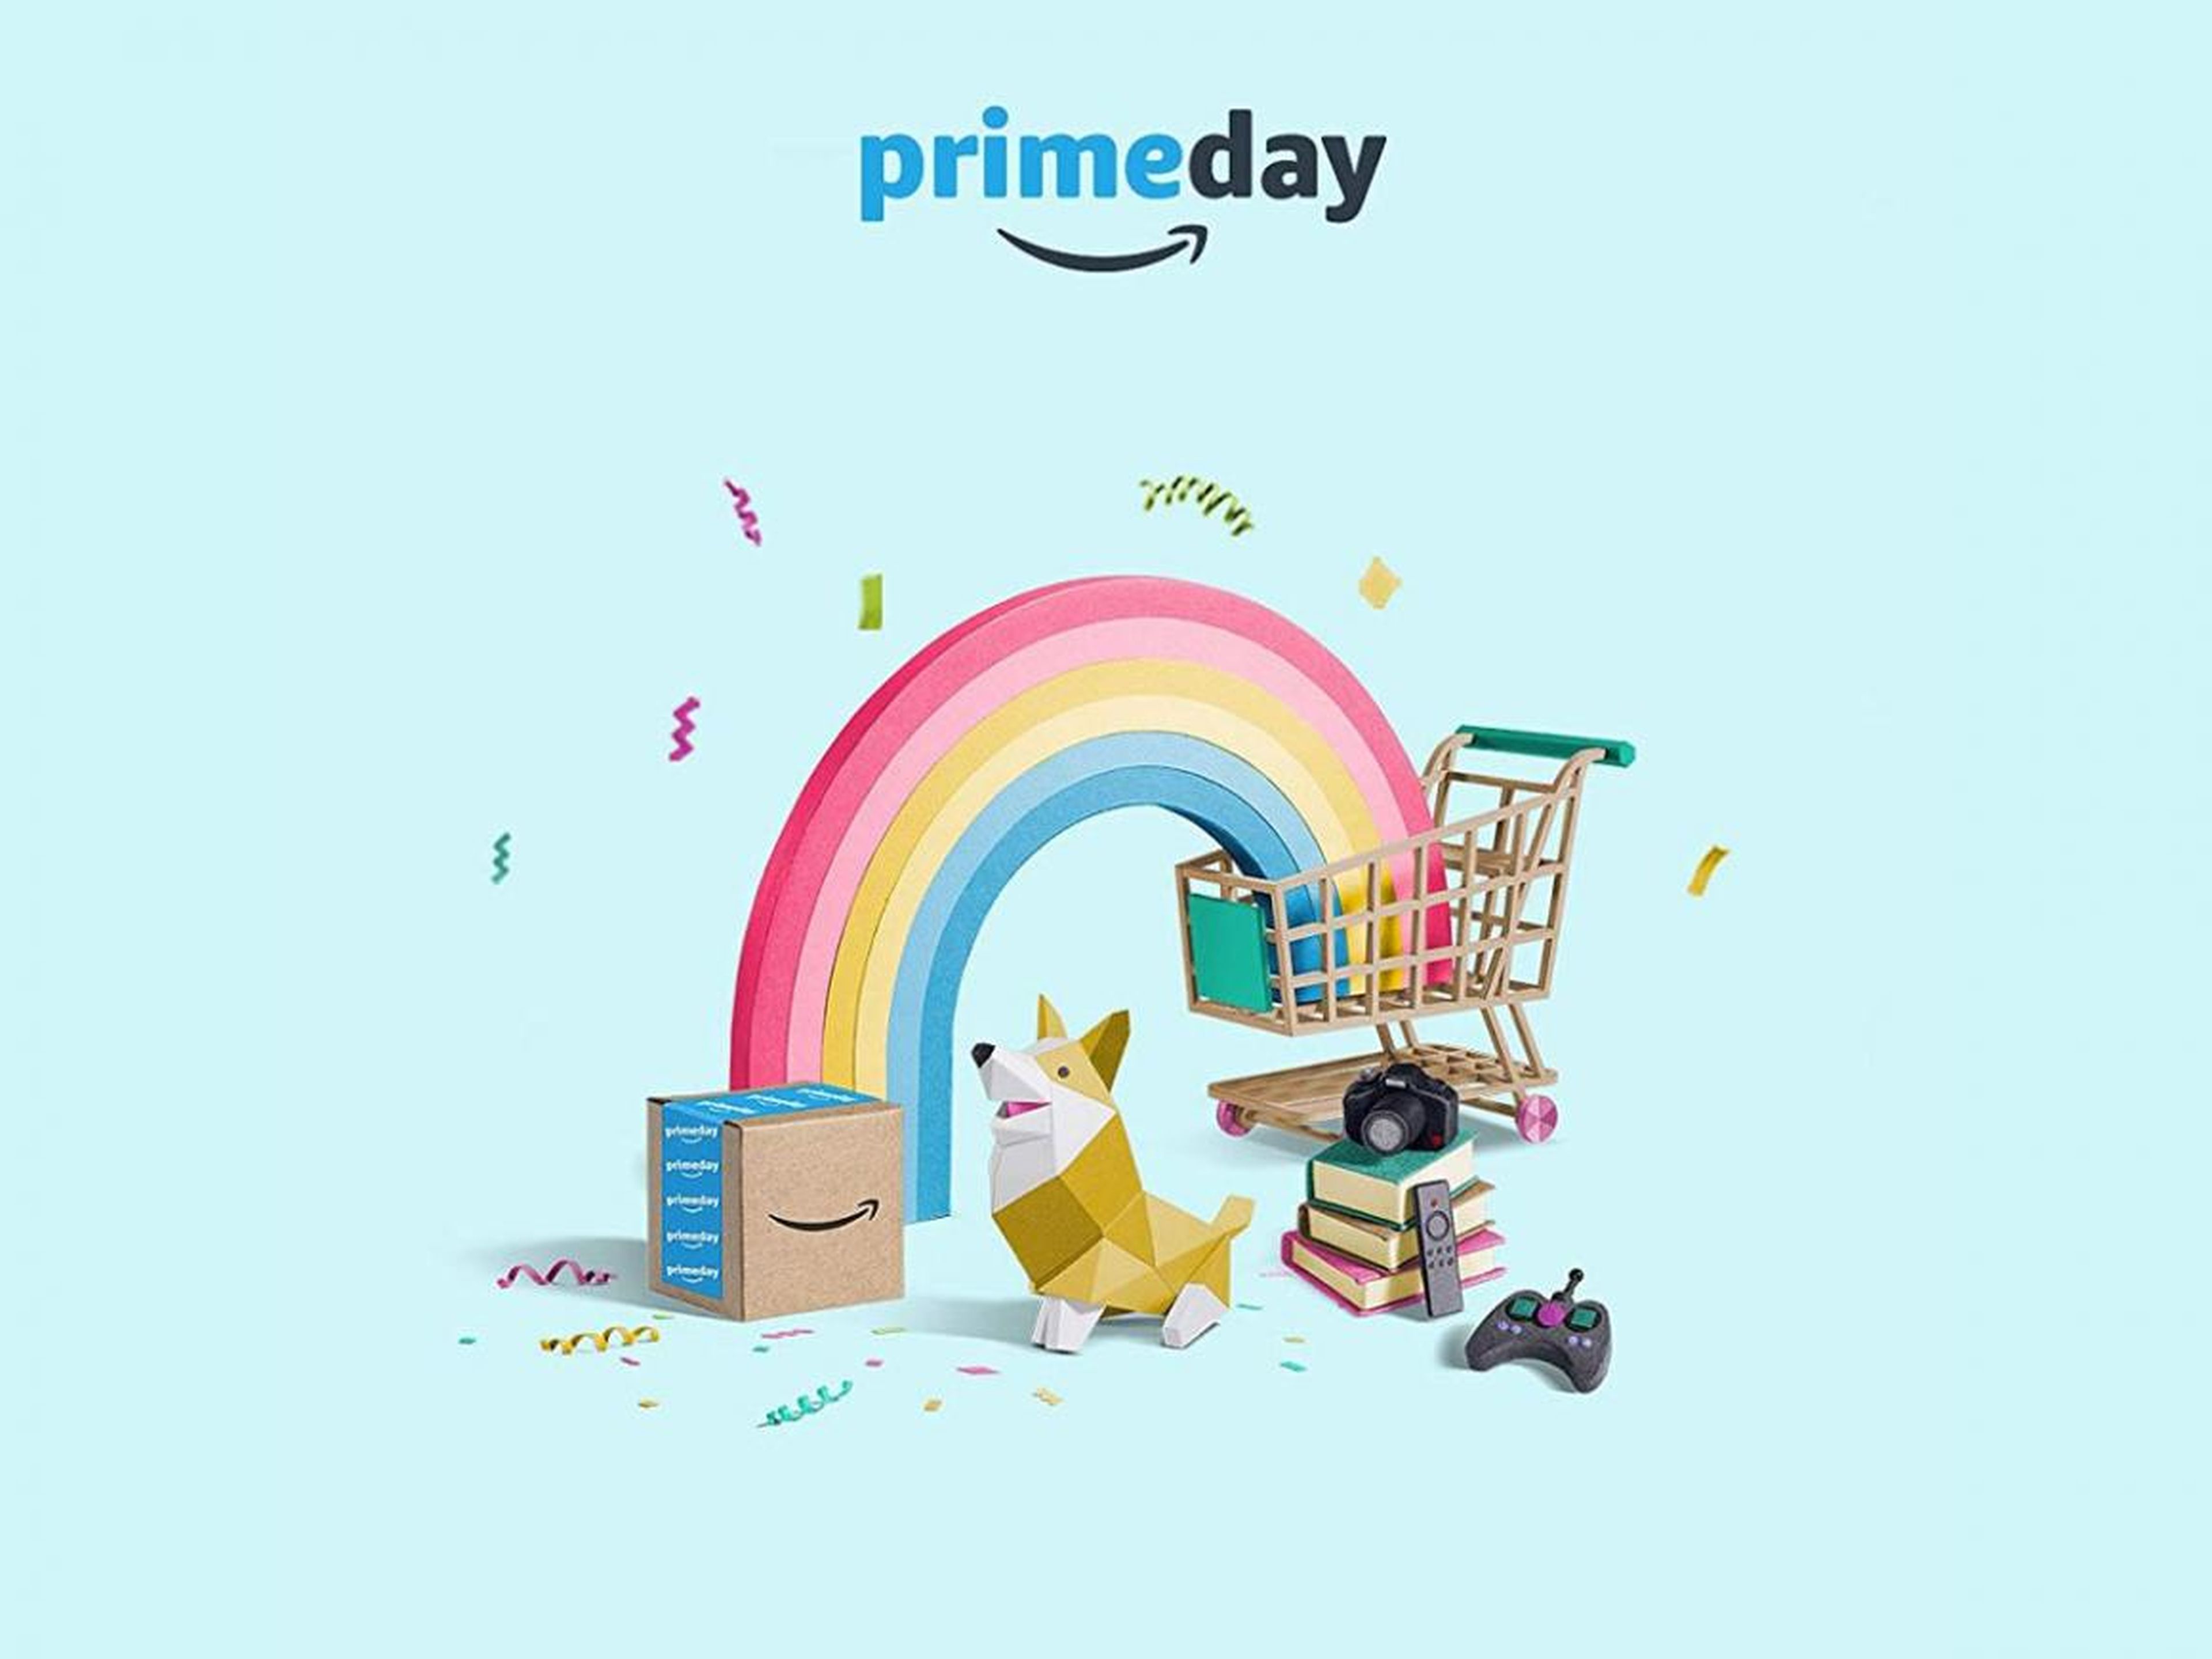 Here's how to use the Amazon app to make sure you never miss a Prime Day deal